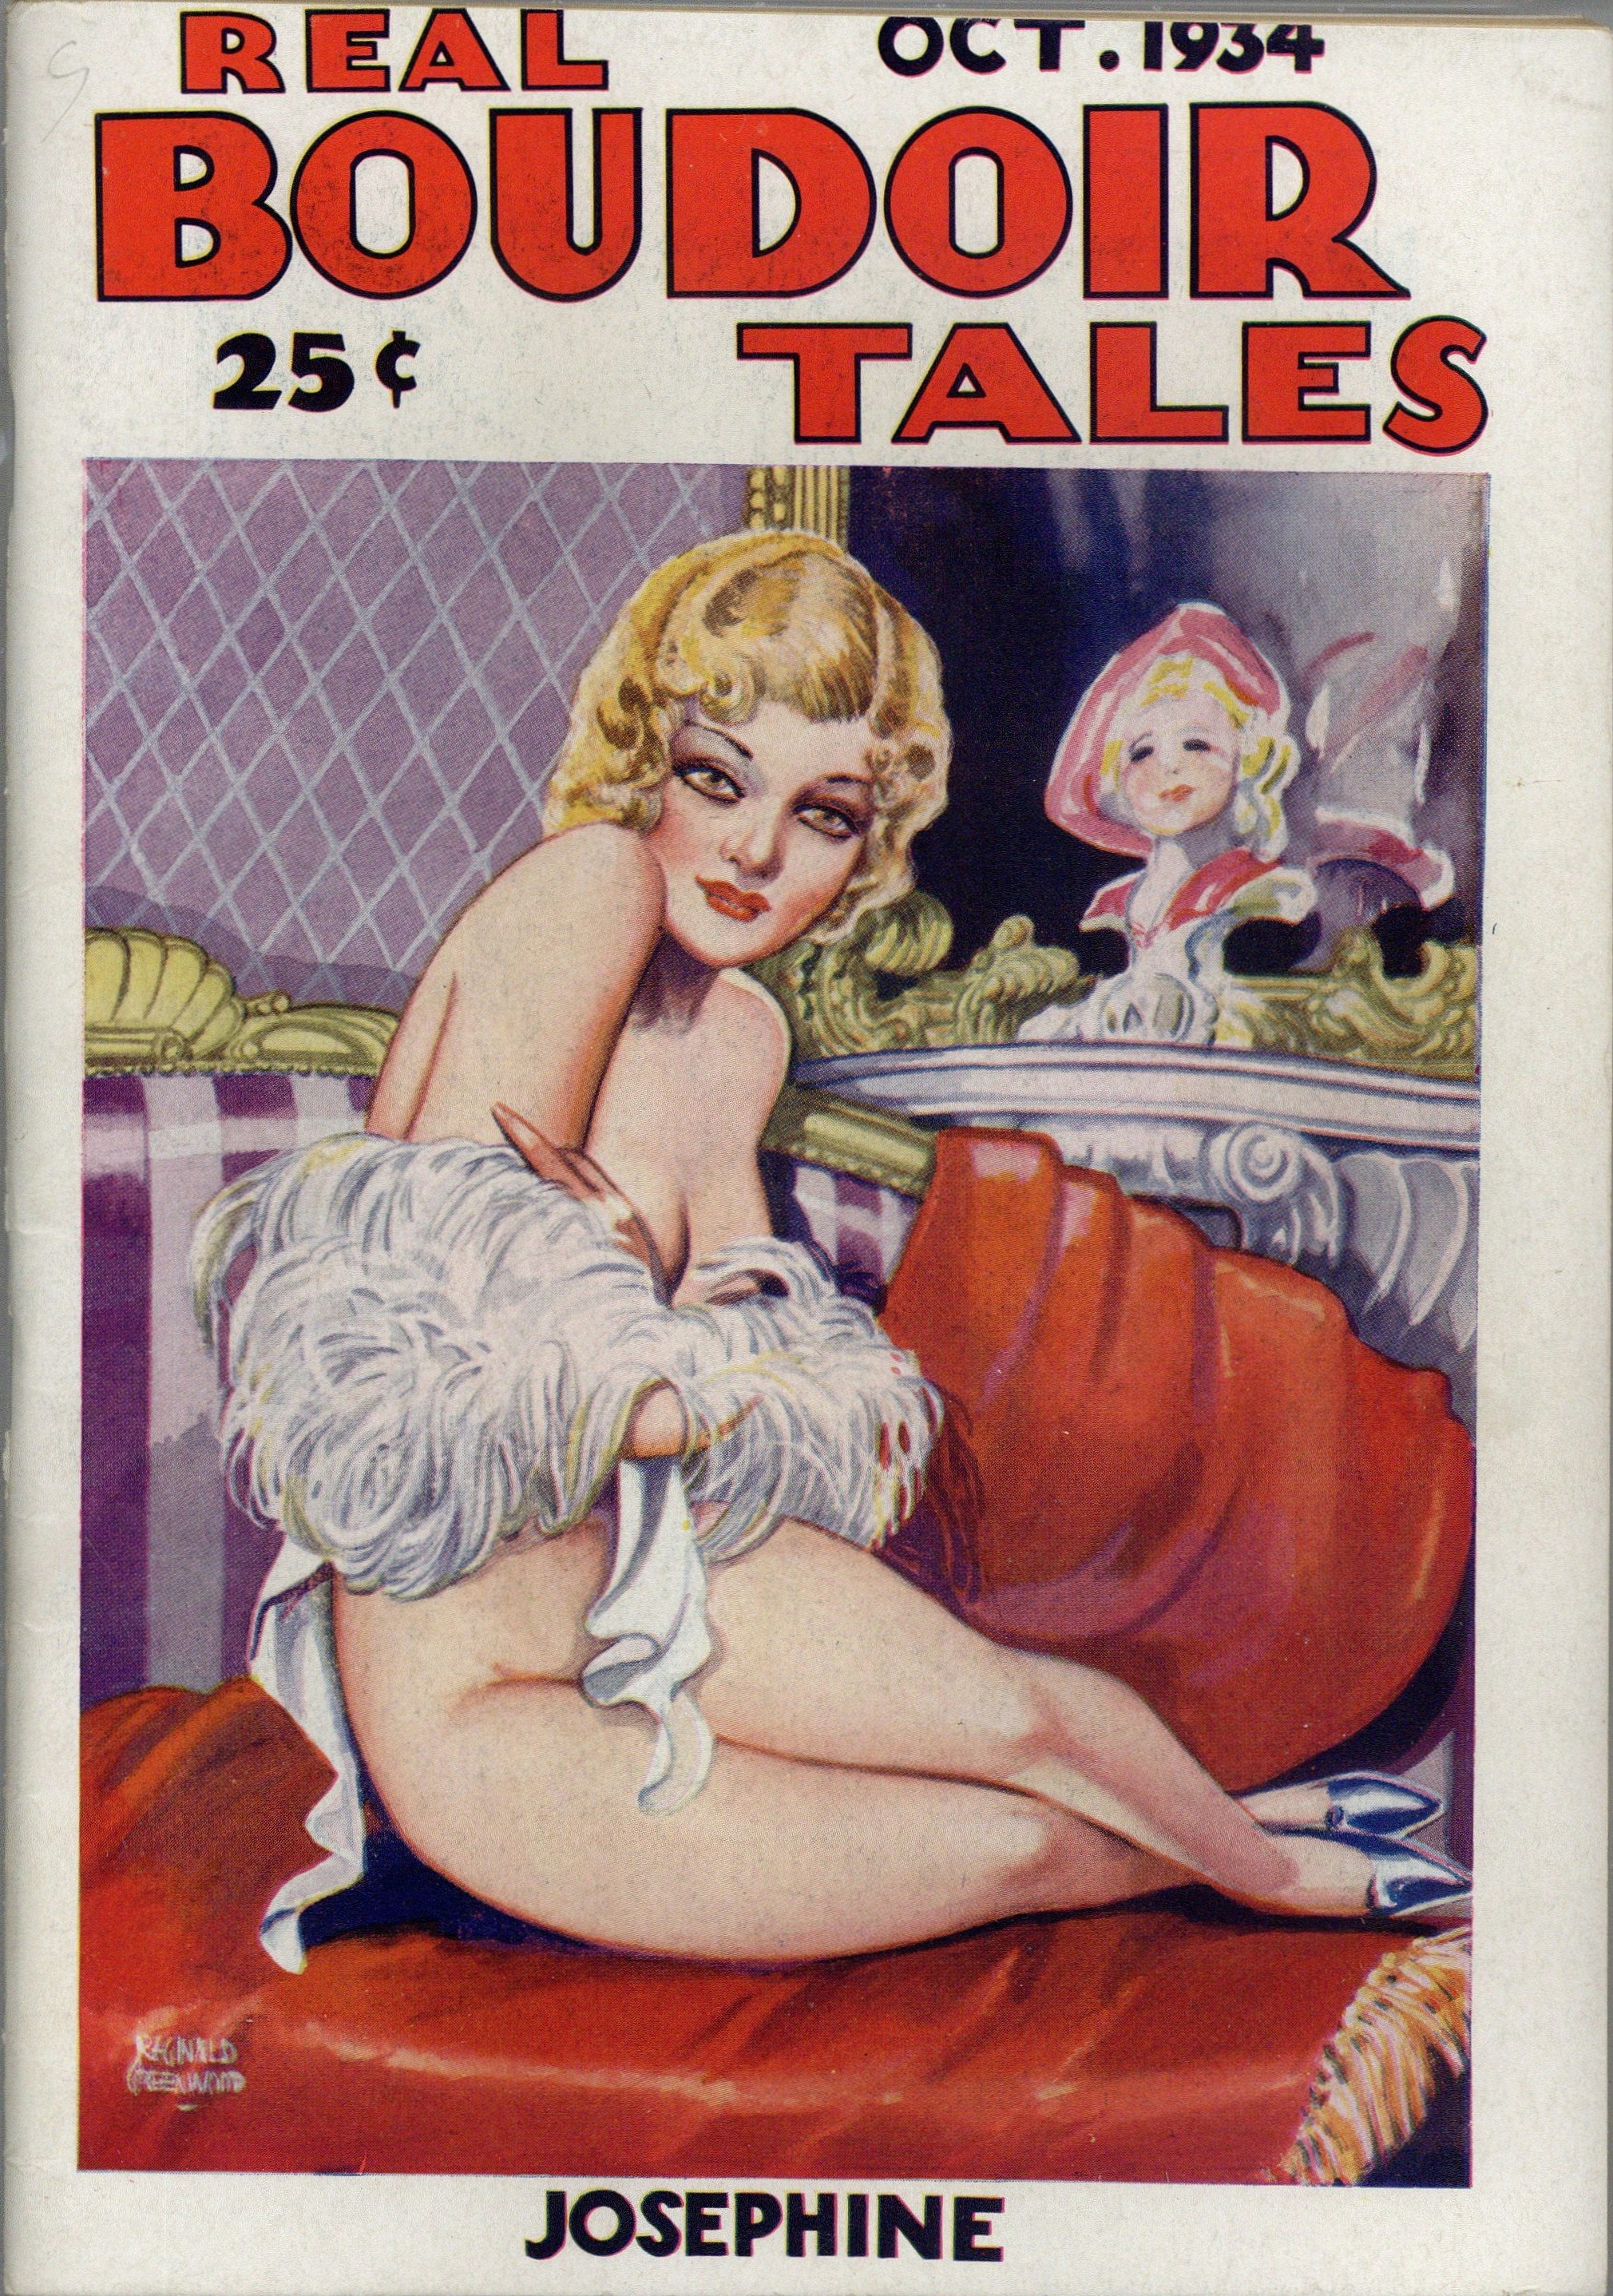 Real Boudoir Tales Volume 1, Issue 1 - October, 1934